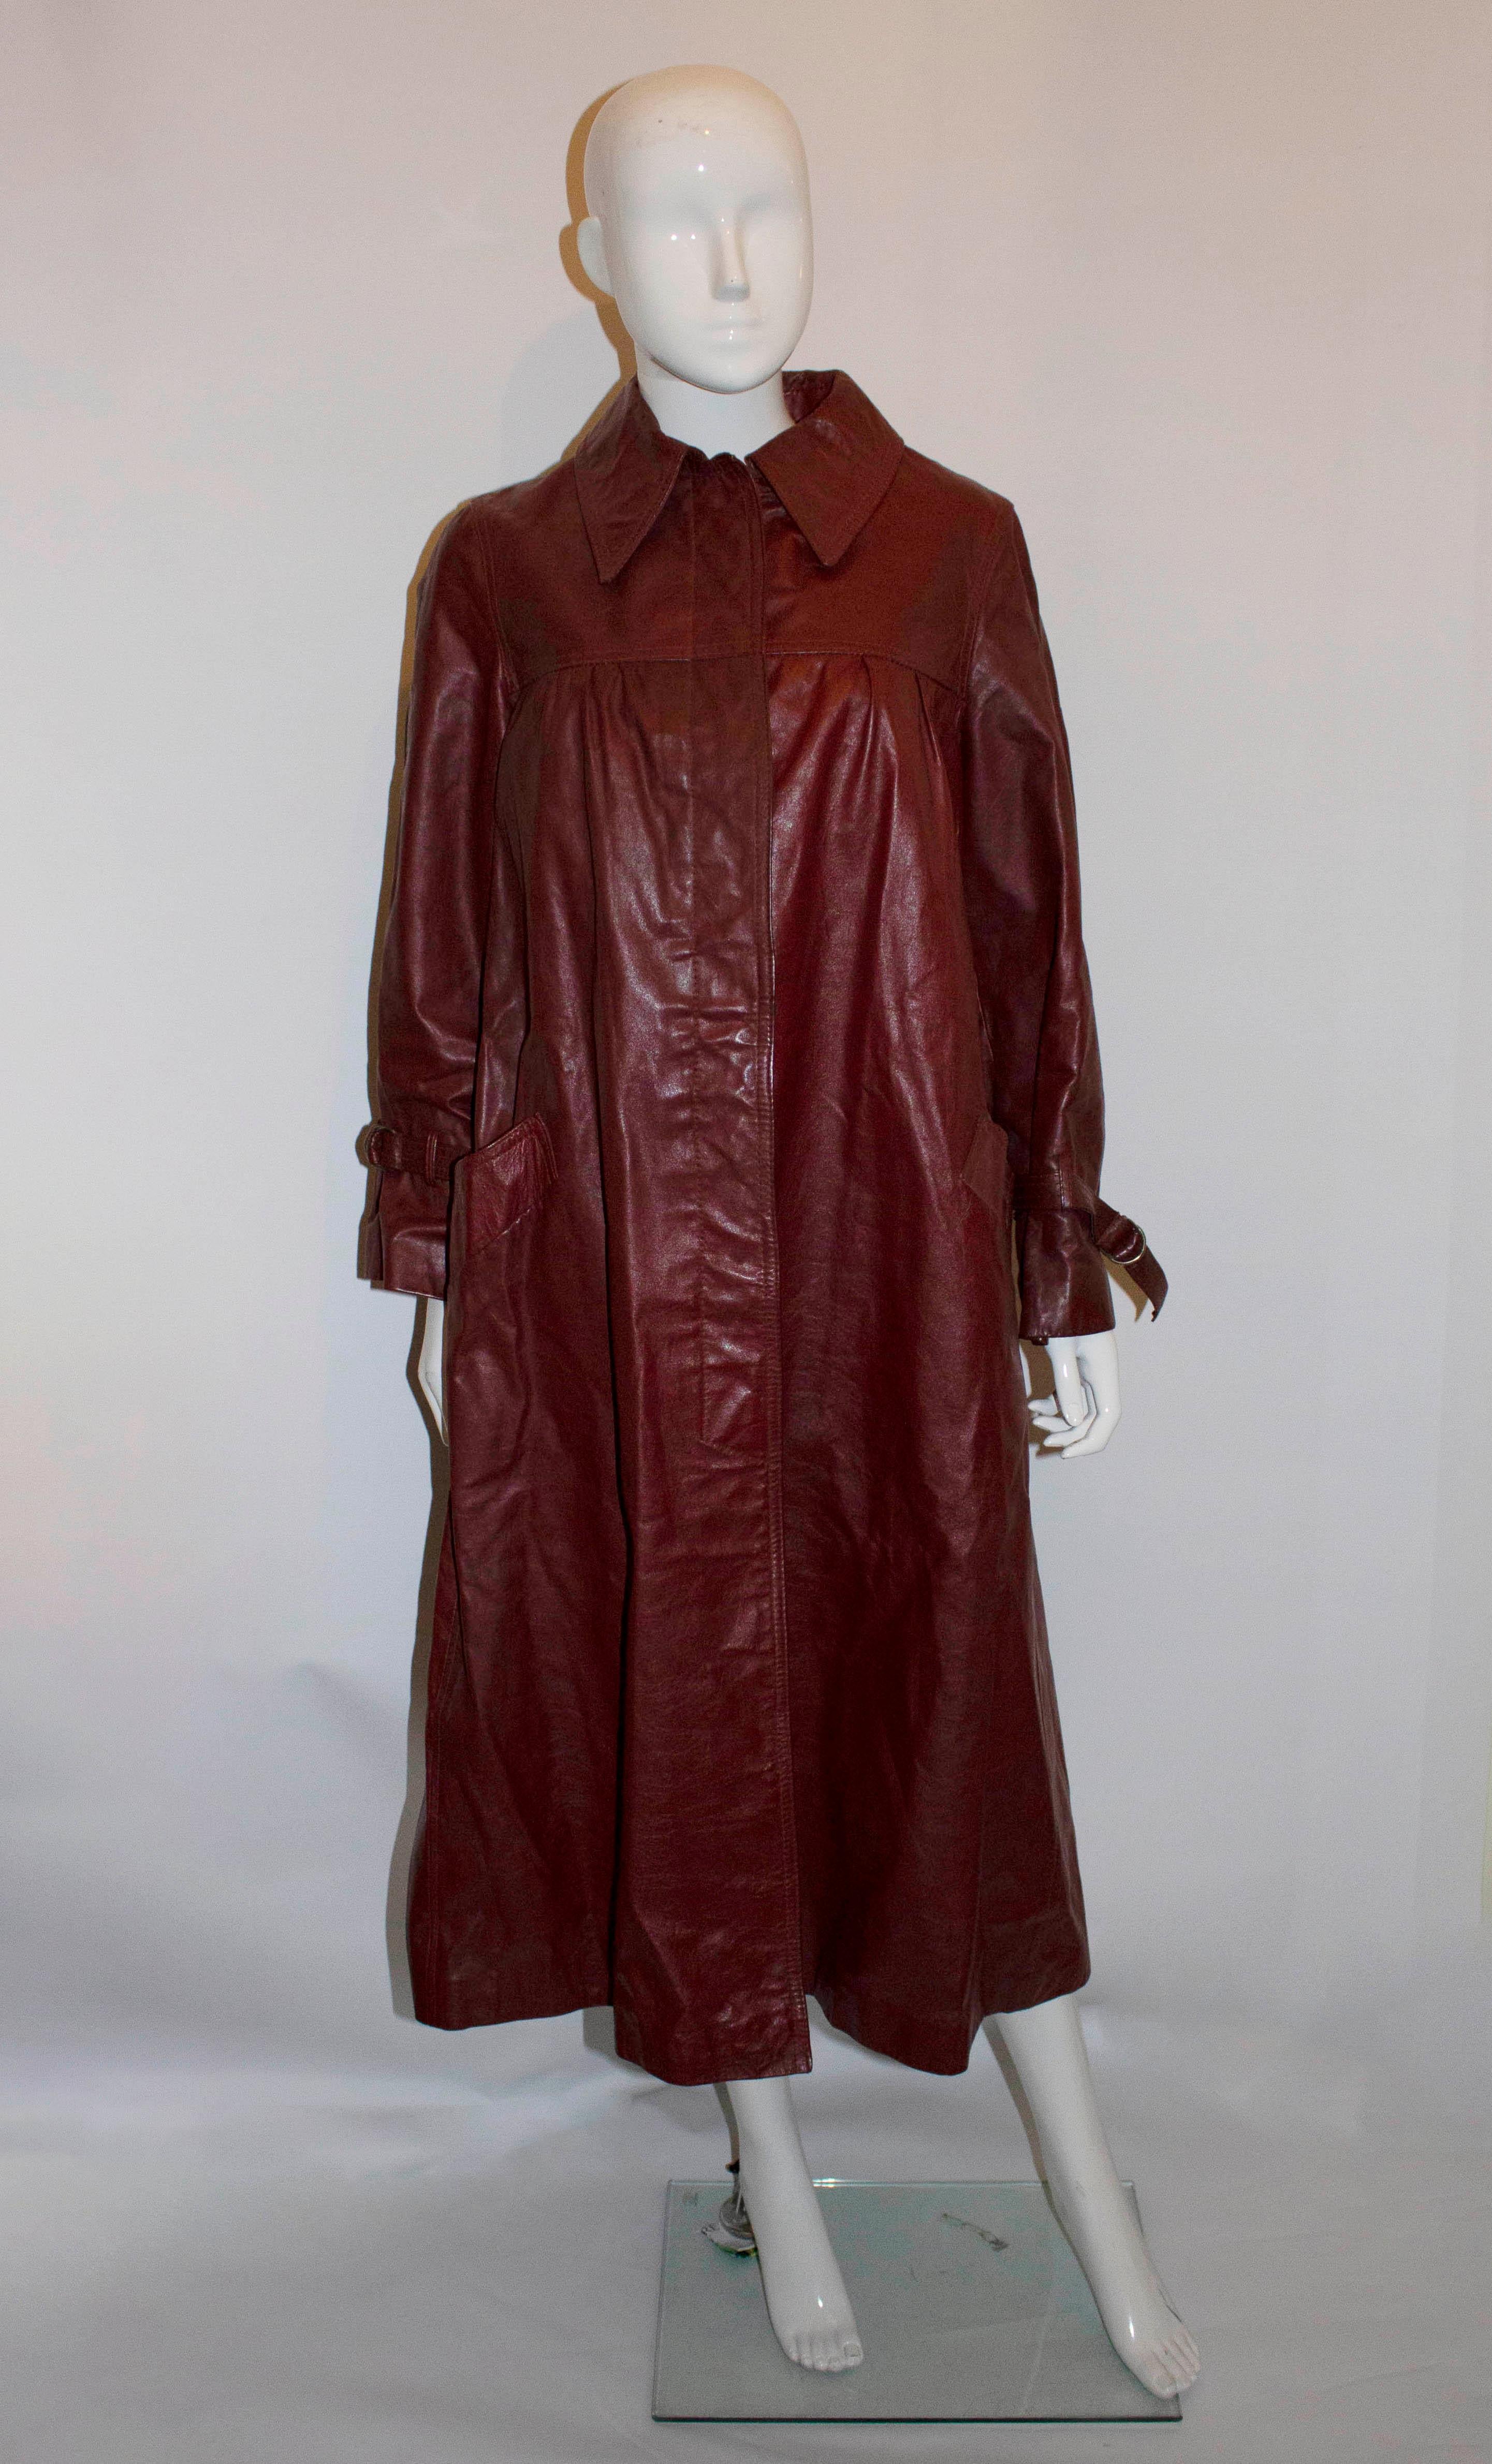 A stylish leather coat by BegedOr, styled in Isreal, made in England. In a burgundy/brown colour the coat has pleats at the yoke , a vent at the back , pockets at the front and is fully lined. 

Measurements: Bust up to 40'', length 47''